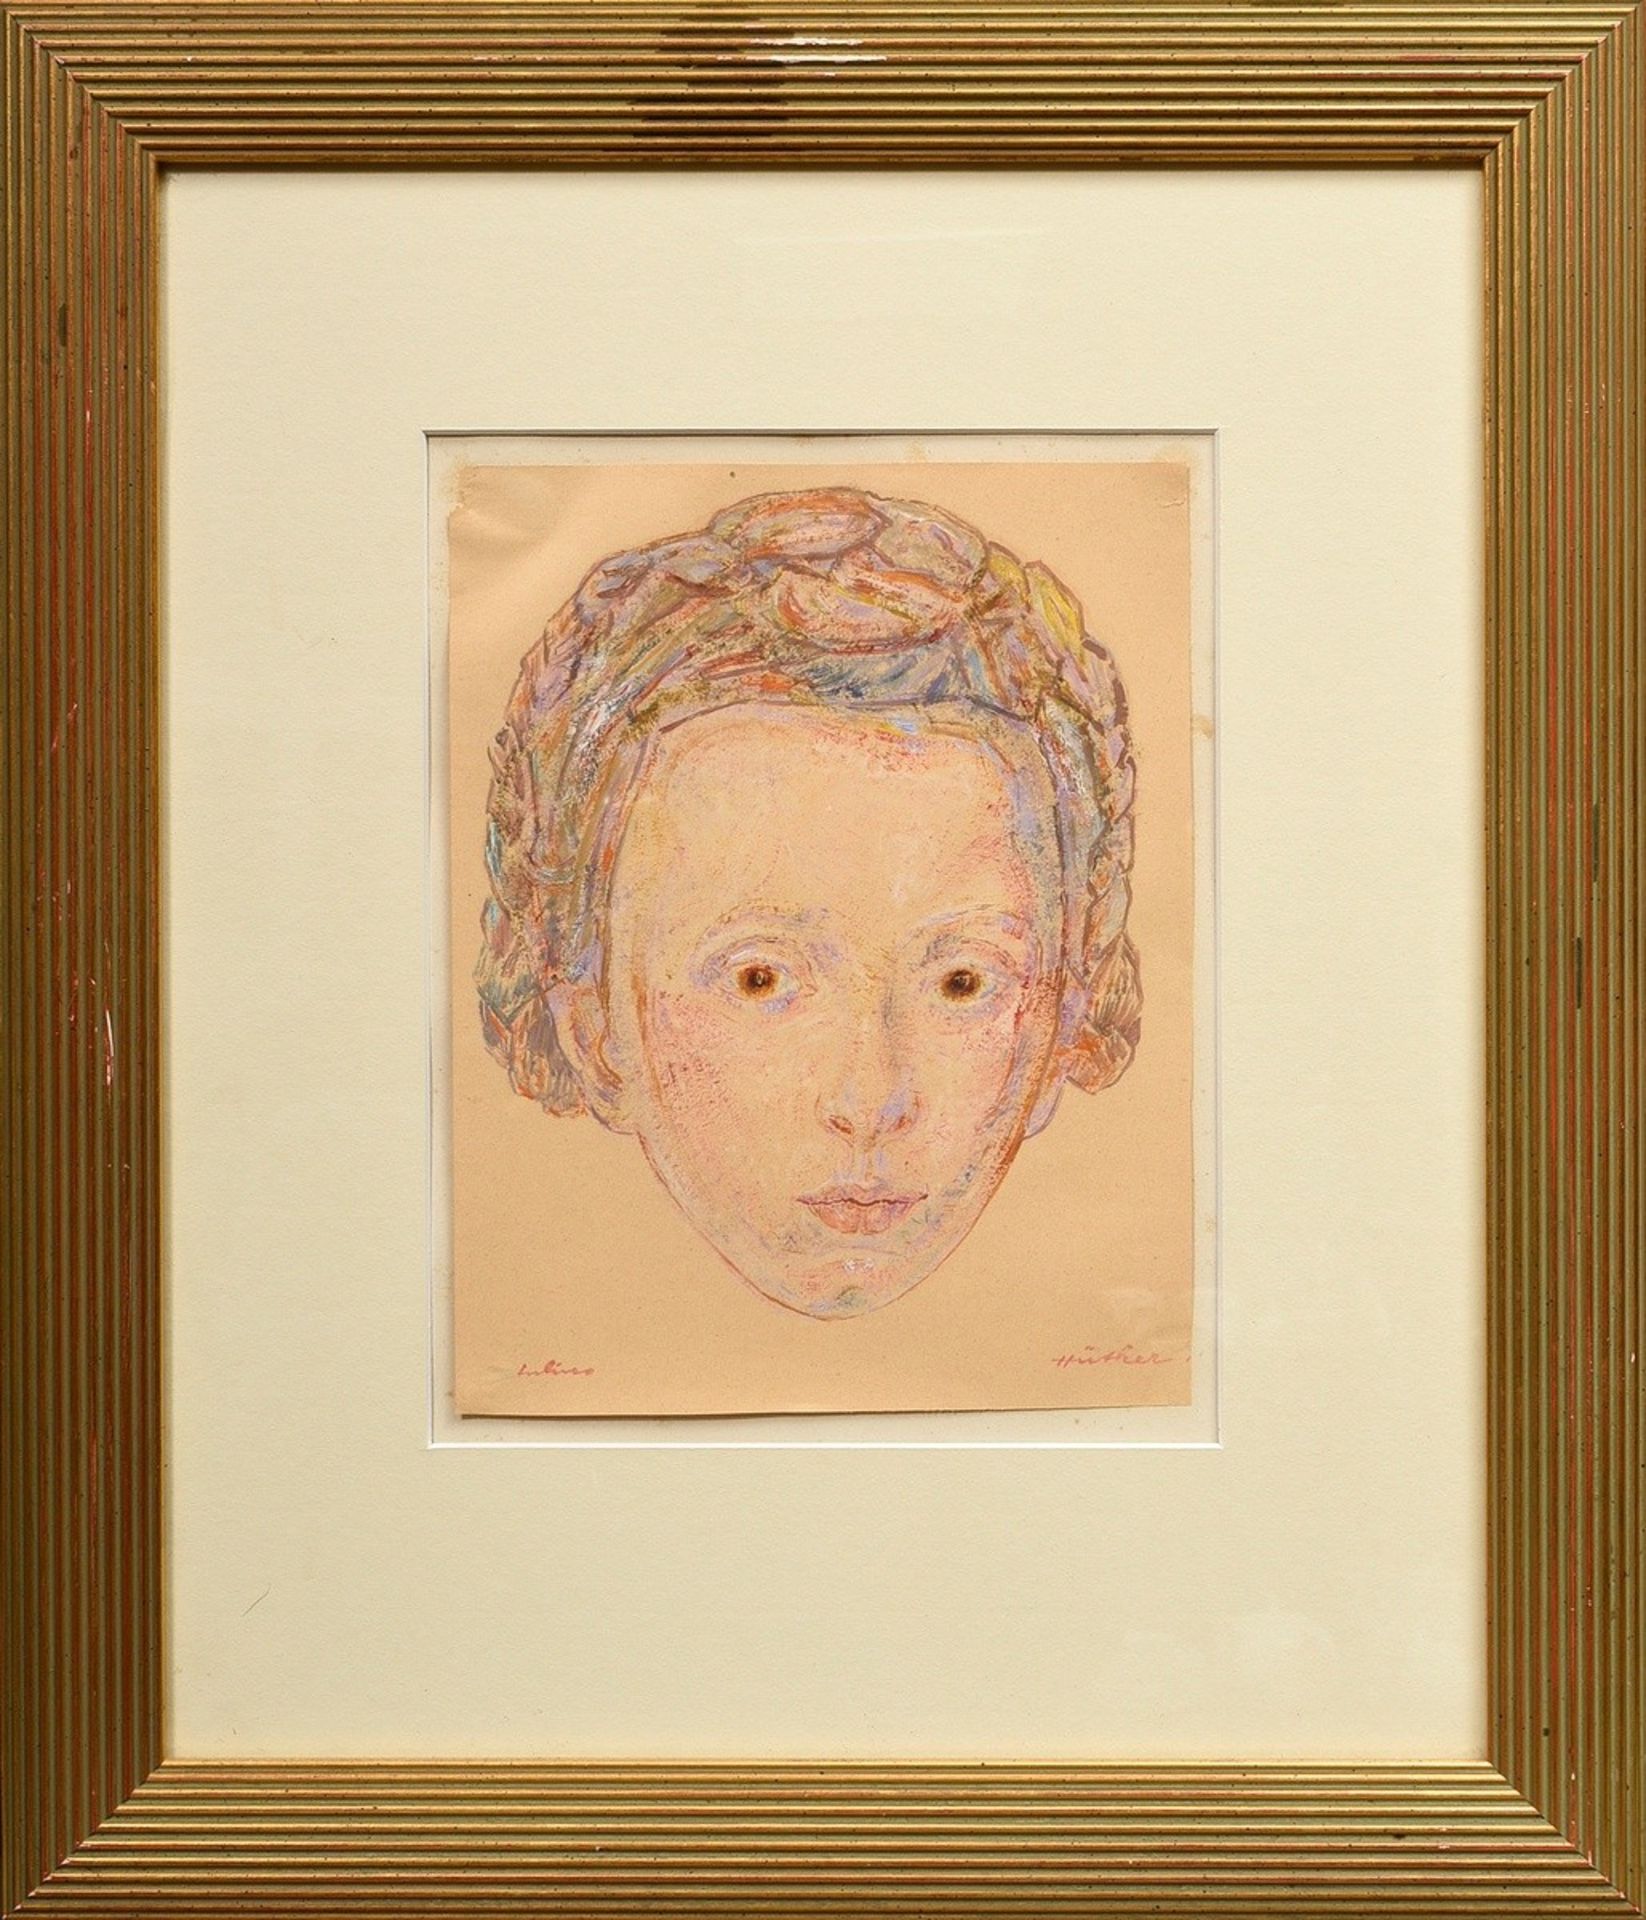 Hüther, Julius (1881-1954) "Portrait of a woman with braided hairstyle", gouache, sign. below, free - Image 2 of 3